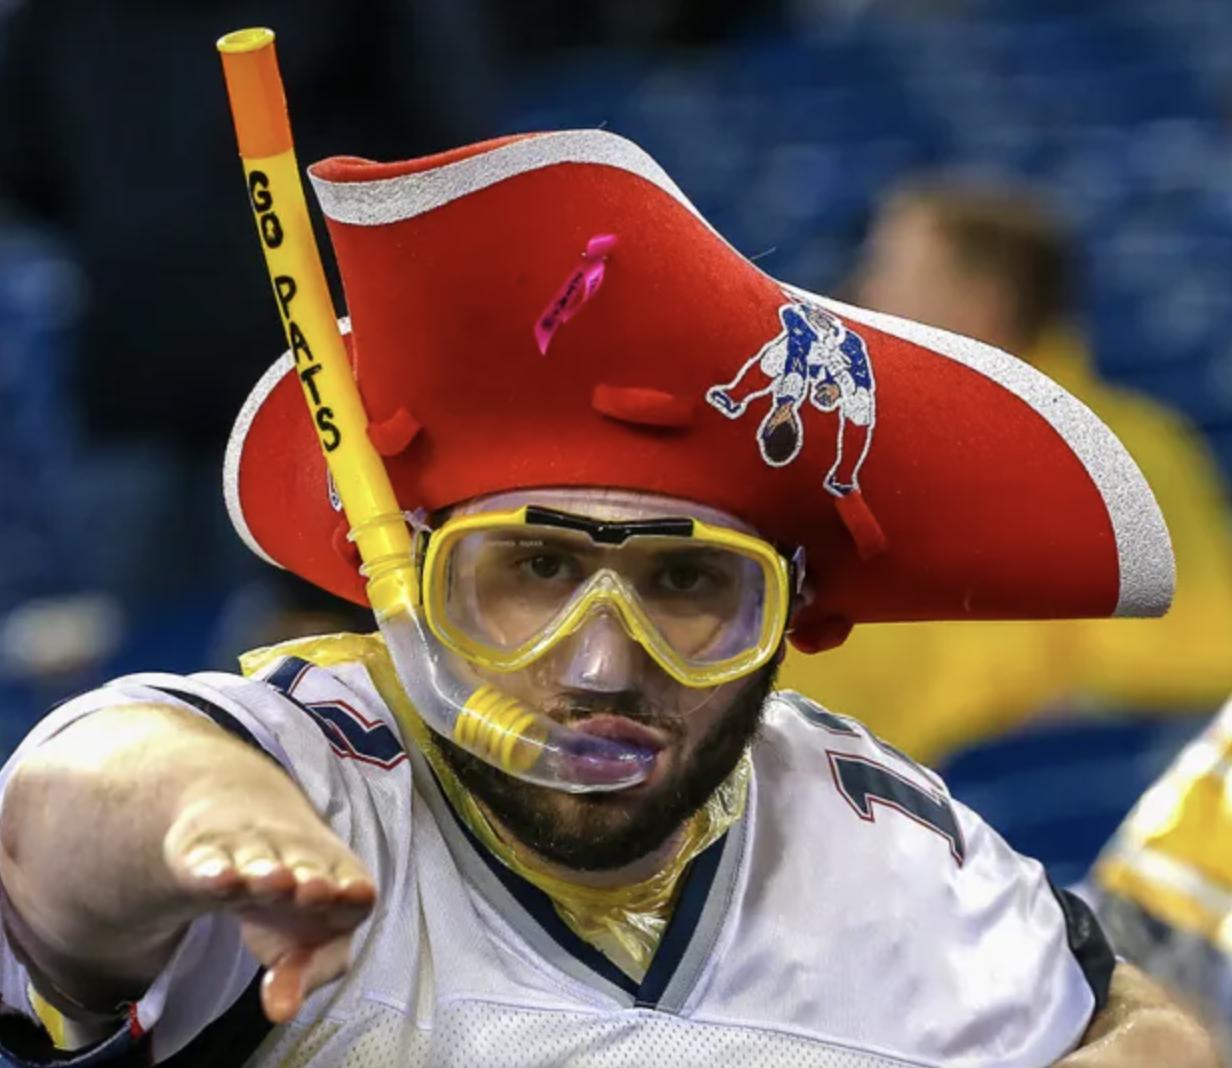 33 Wacked Out NFL Fans that Go All Out for Their Team